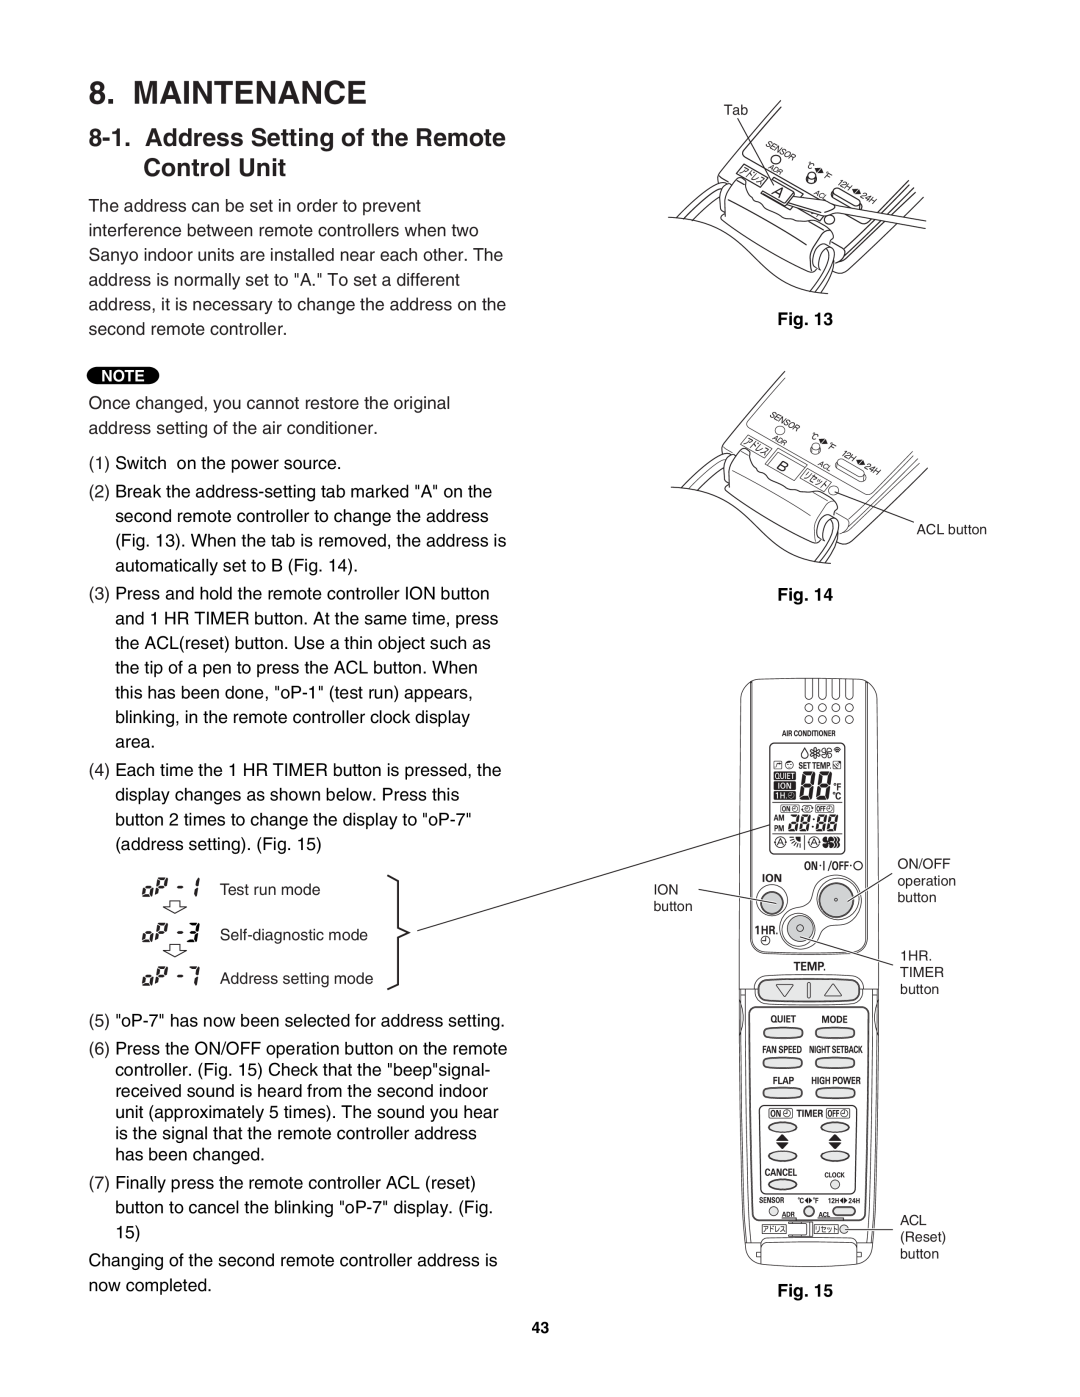 Sanyo CL1872, C2472, C1872, CL2472 service manual Maintenance, Address Setting of the Remote Control Unit 